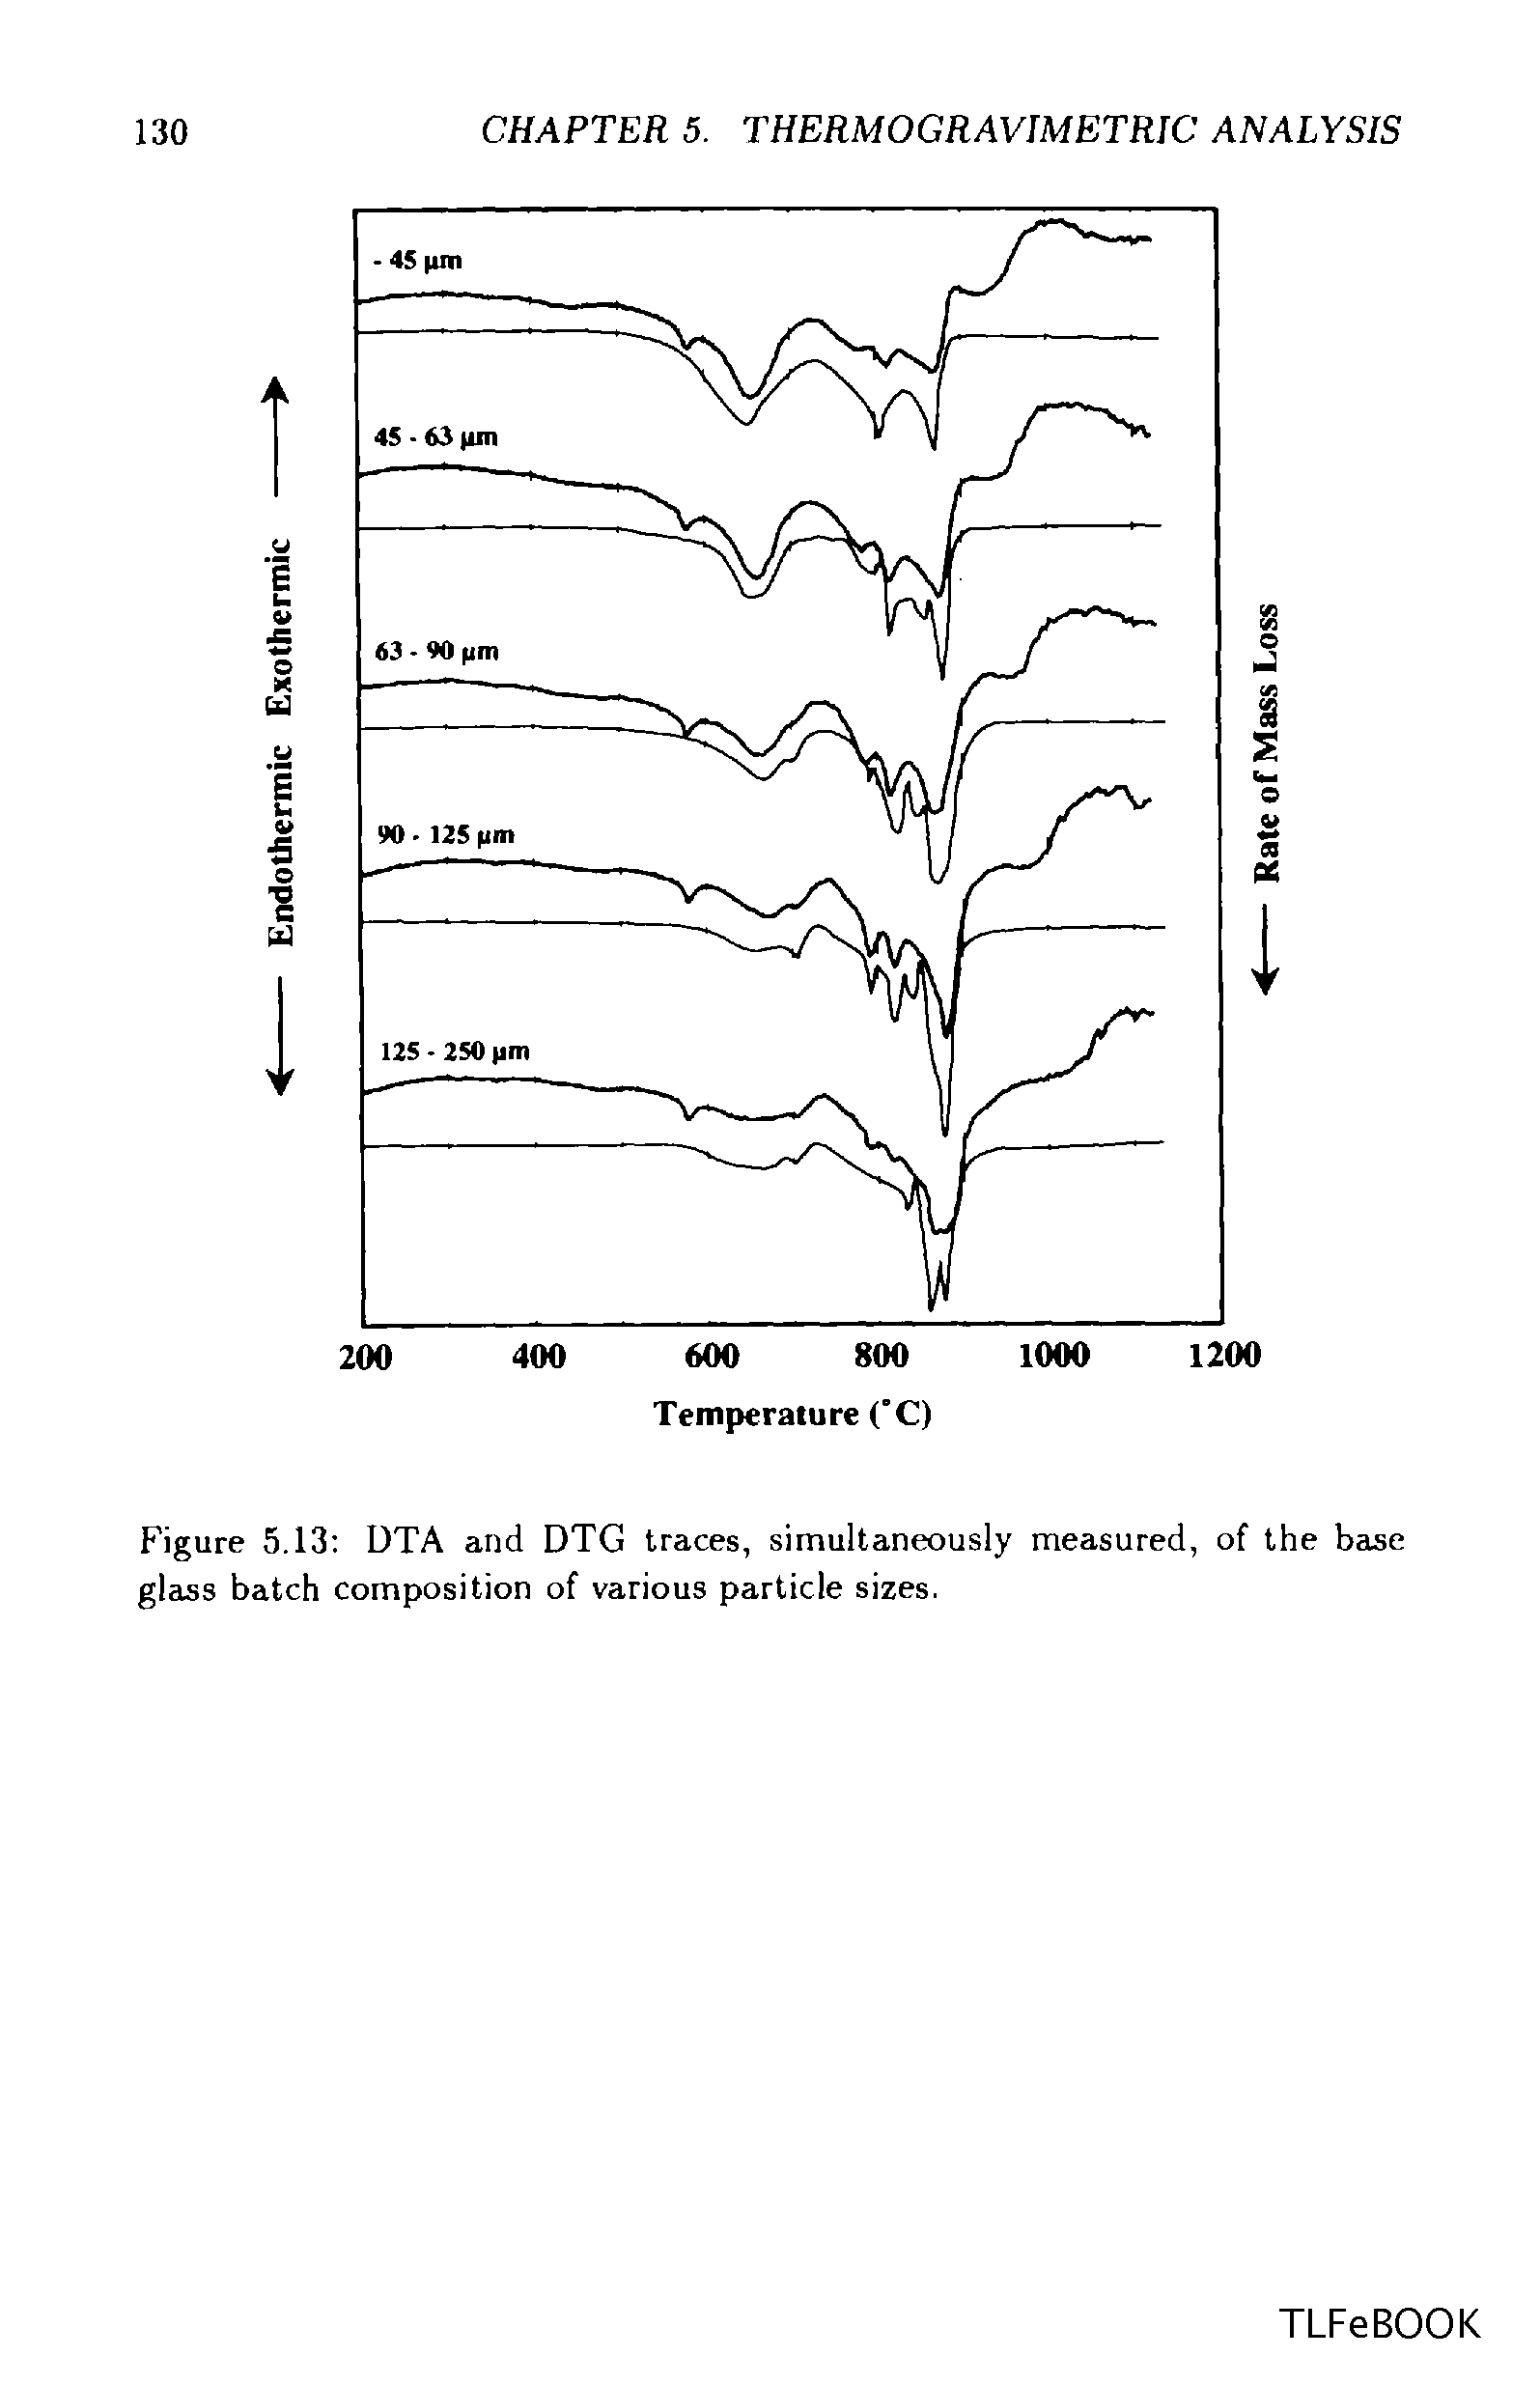 Figure 5.13 DTA and DTG traces, simultaneously measured, of the base glass batch composition of various particle sizes.